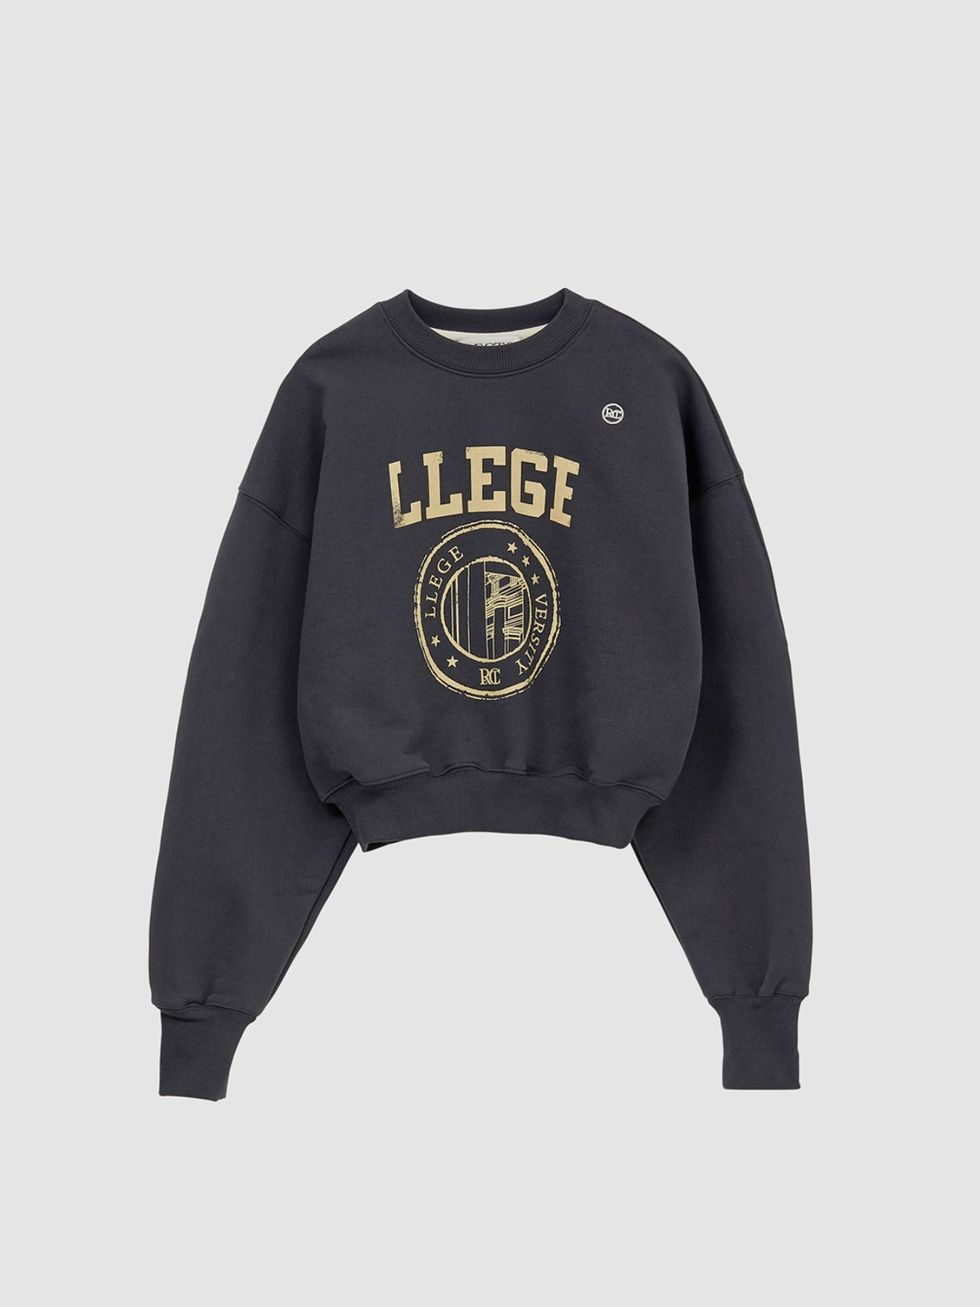 a black sweater with a gold logo